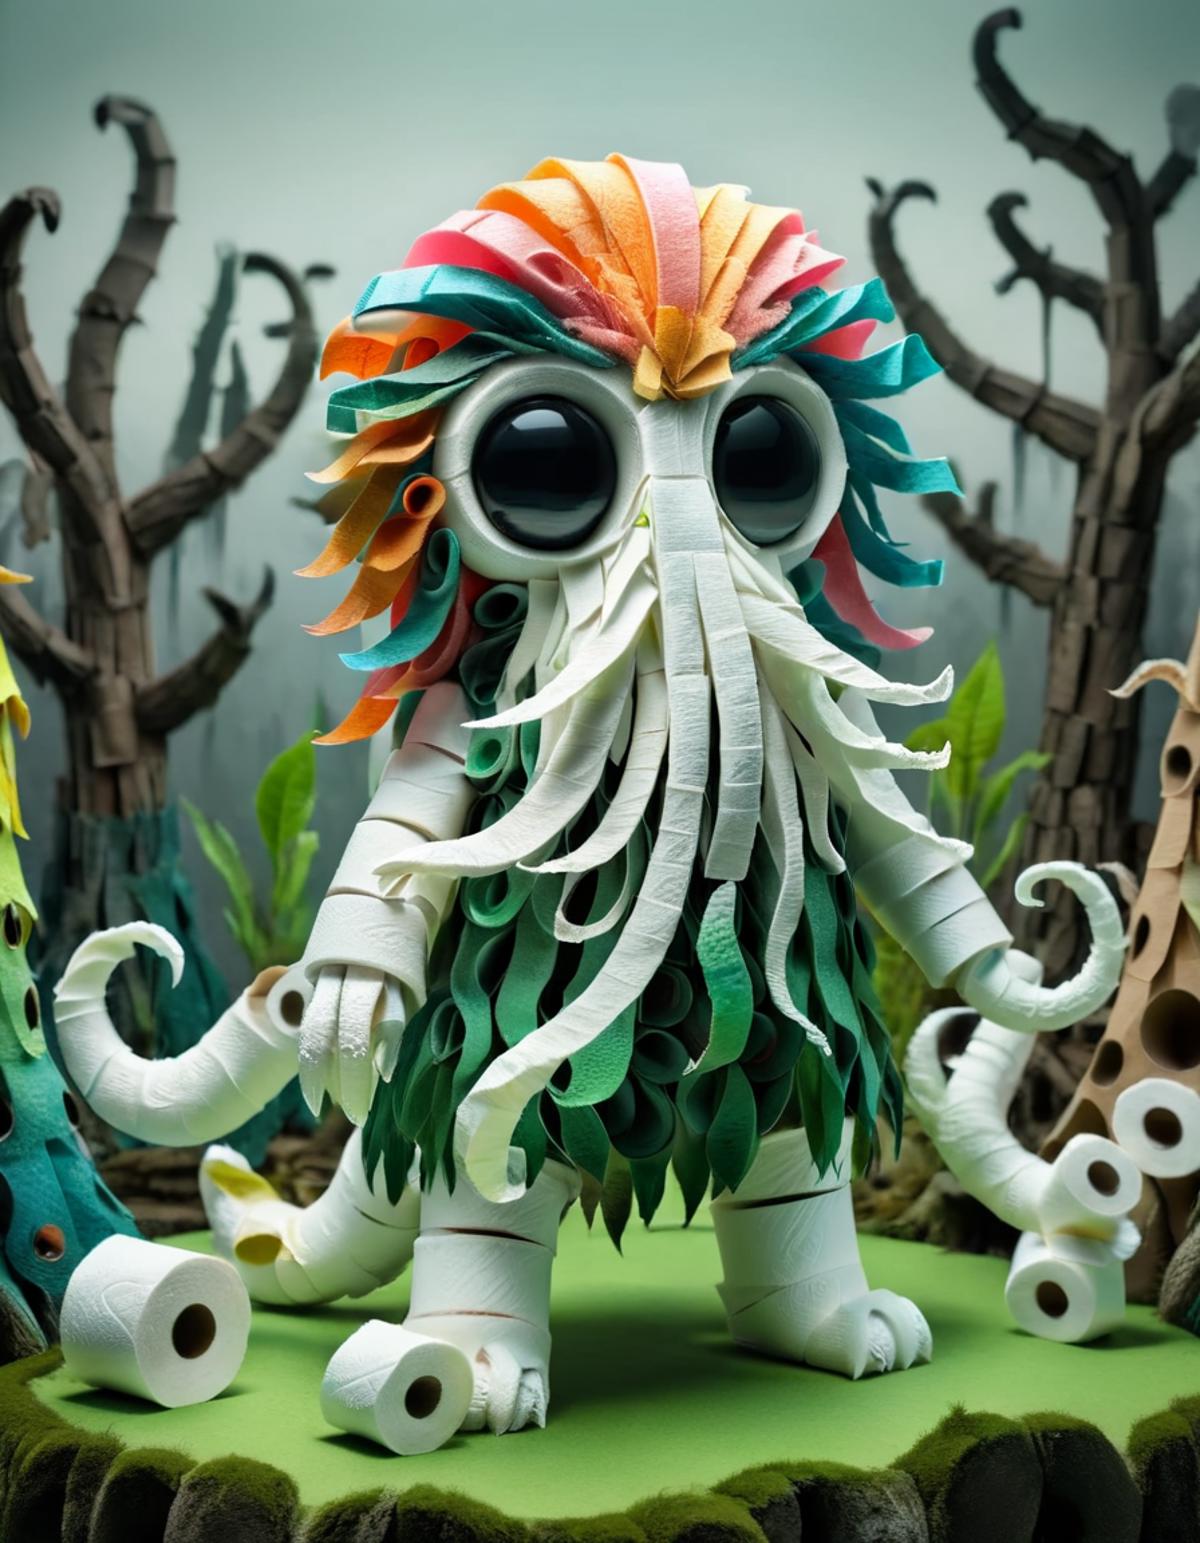 An artistic paper monster with a colorful head and tentacles.